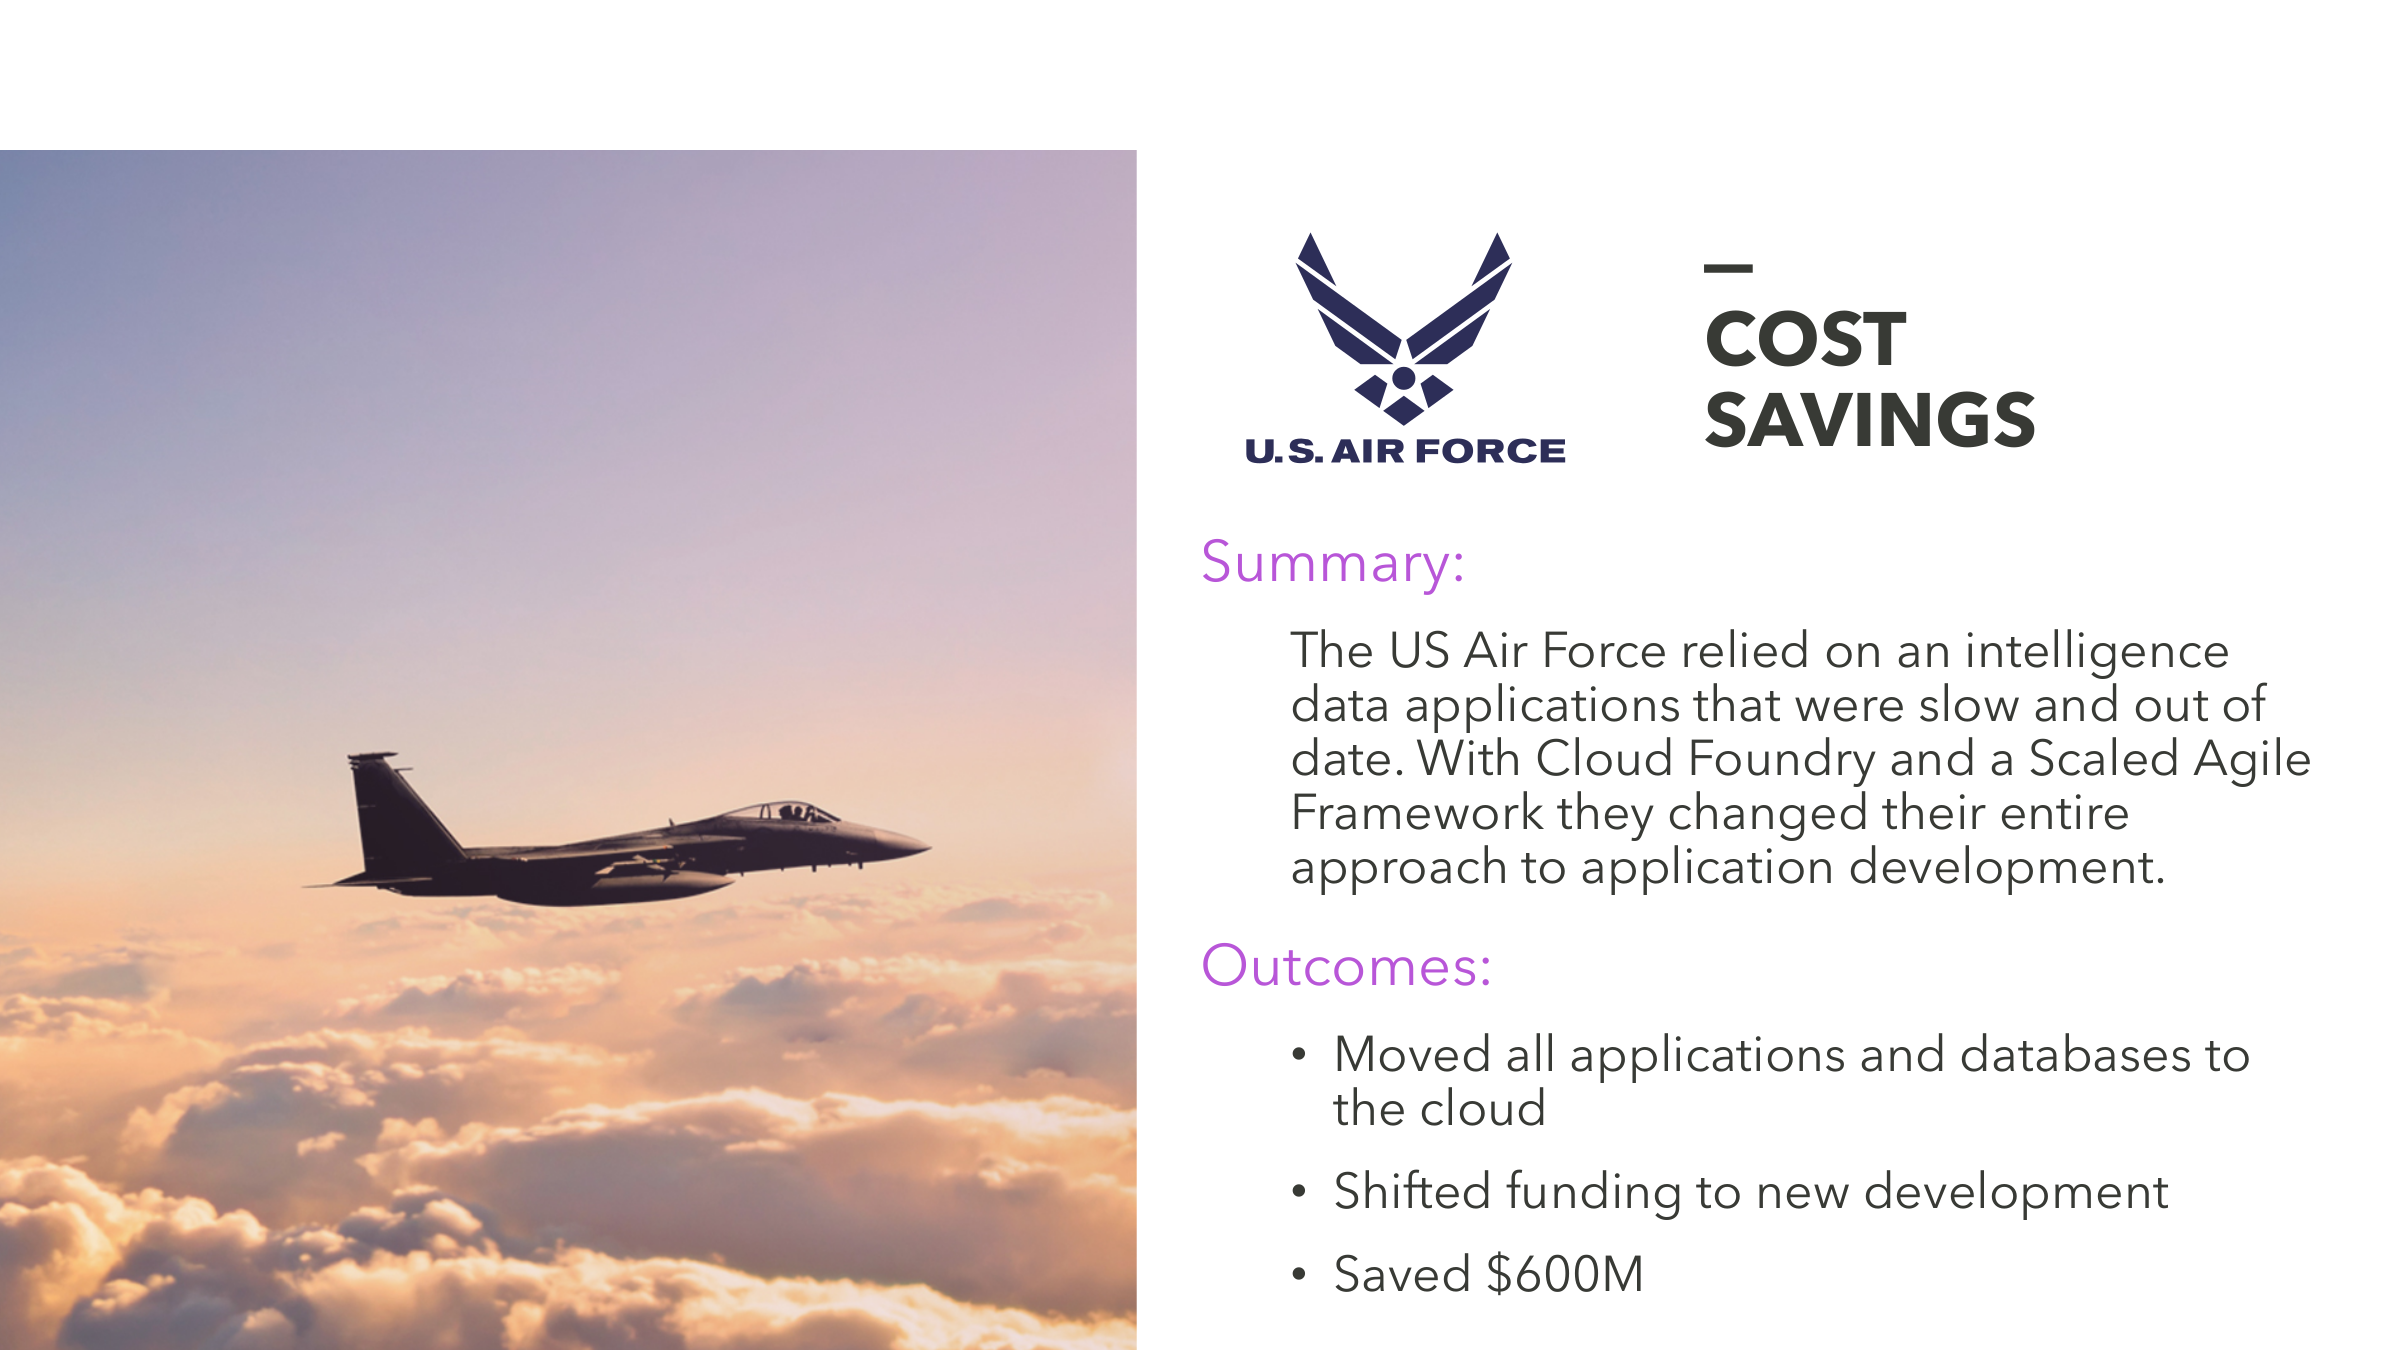 Picture of a jet fighter flying over clouds, the logo of the USAF and stats about the cost savings due their move to the cloud